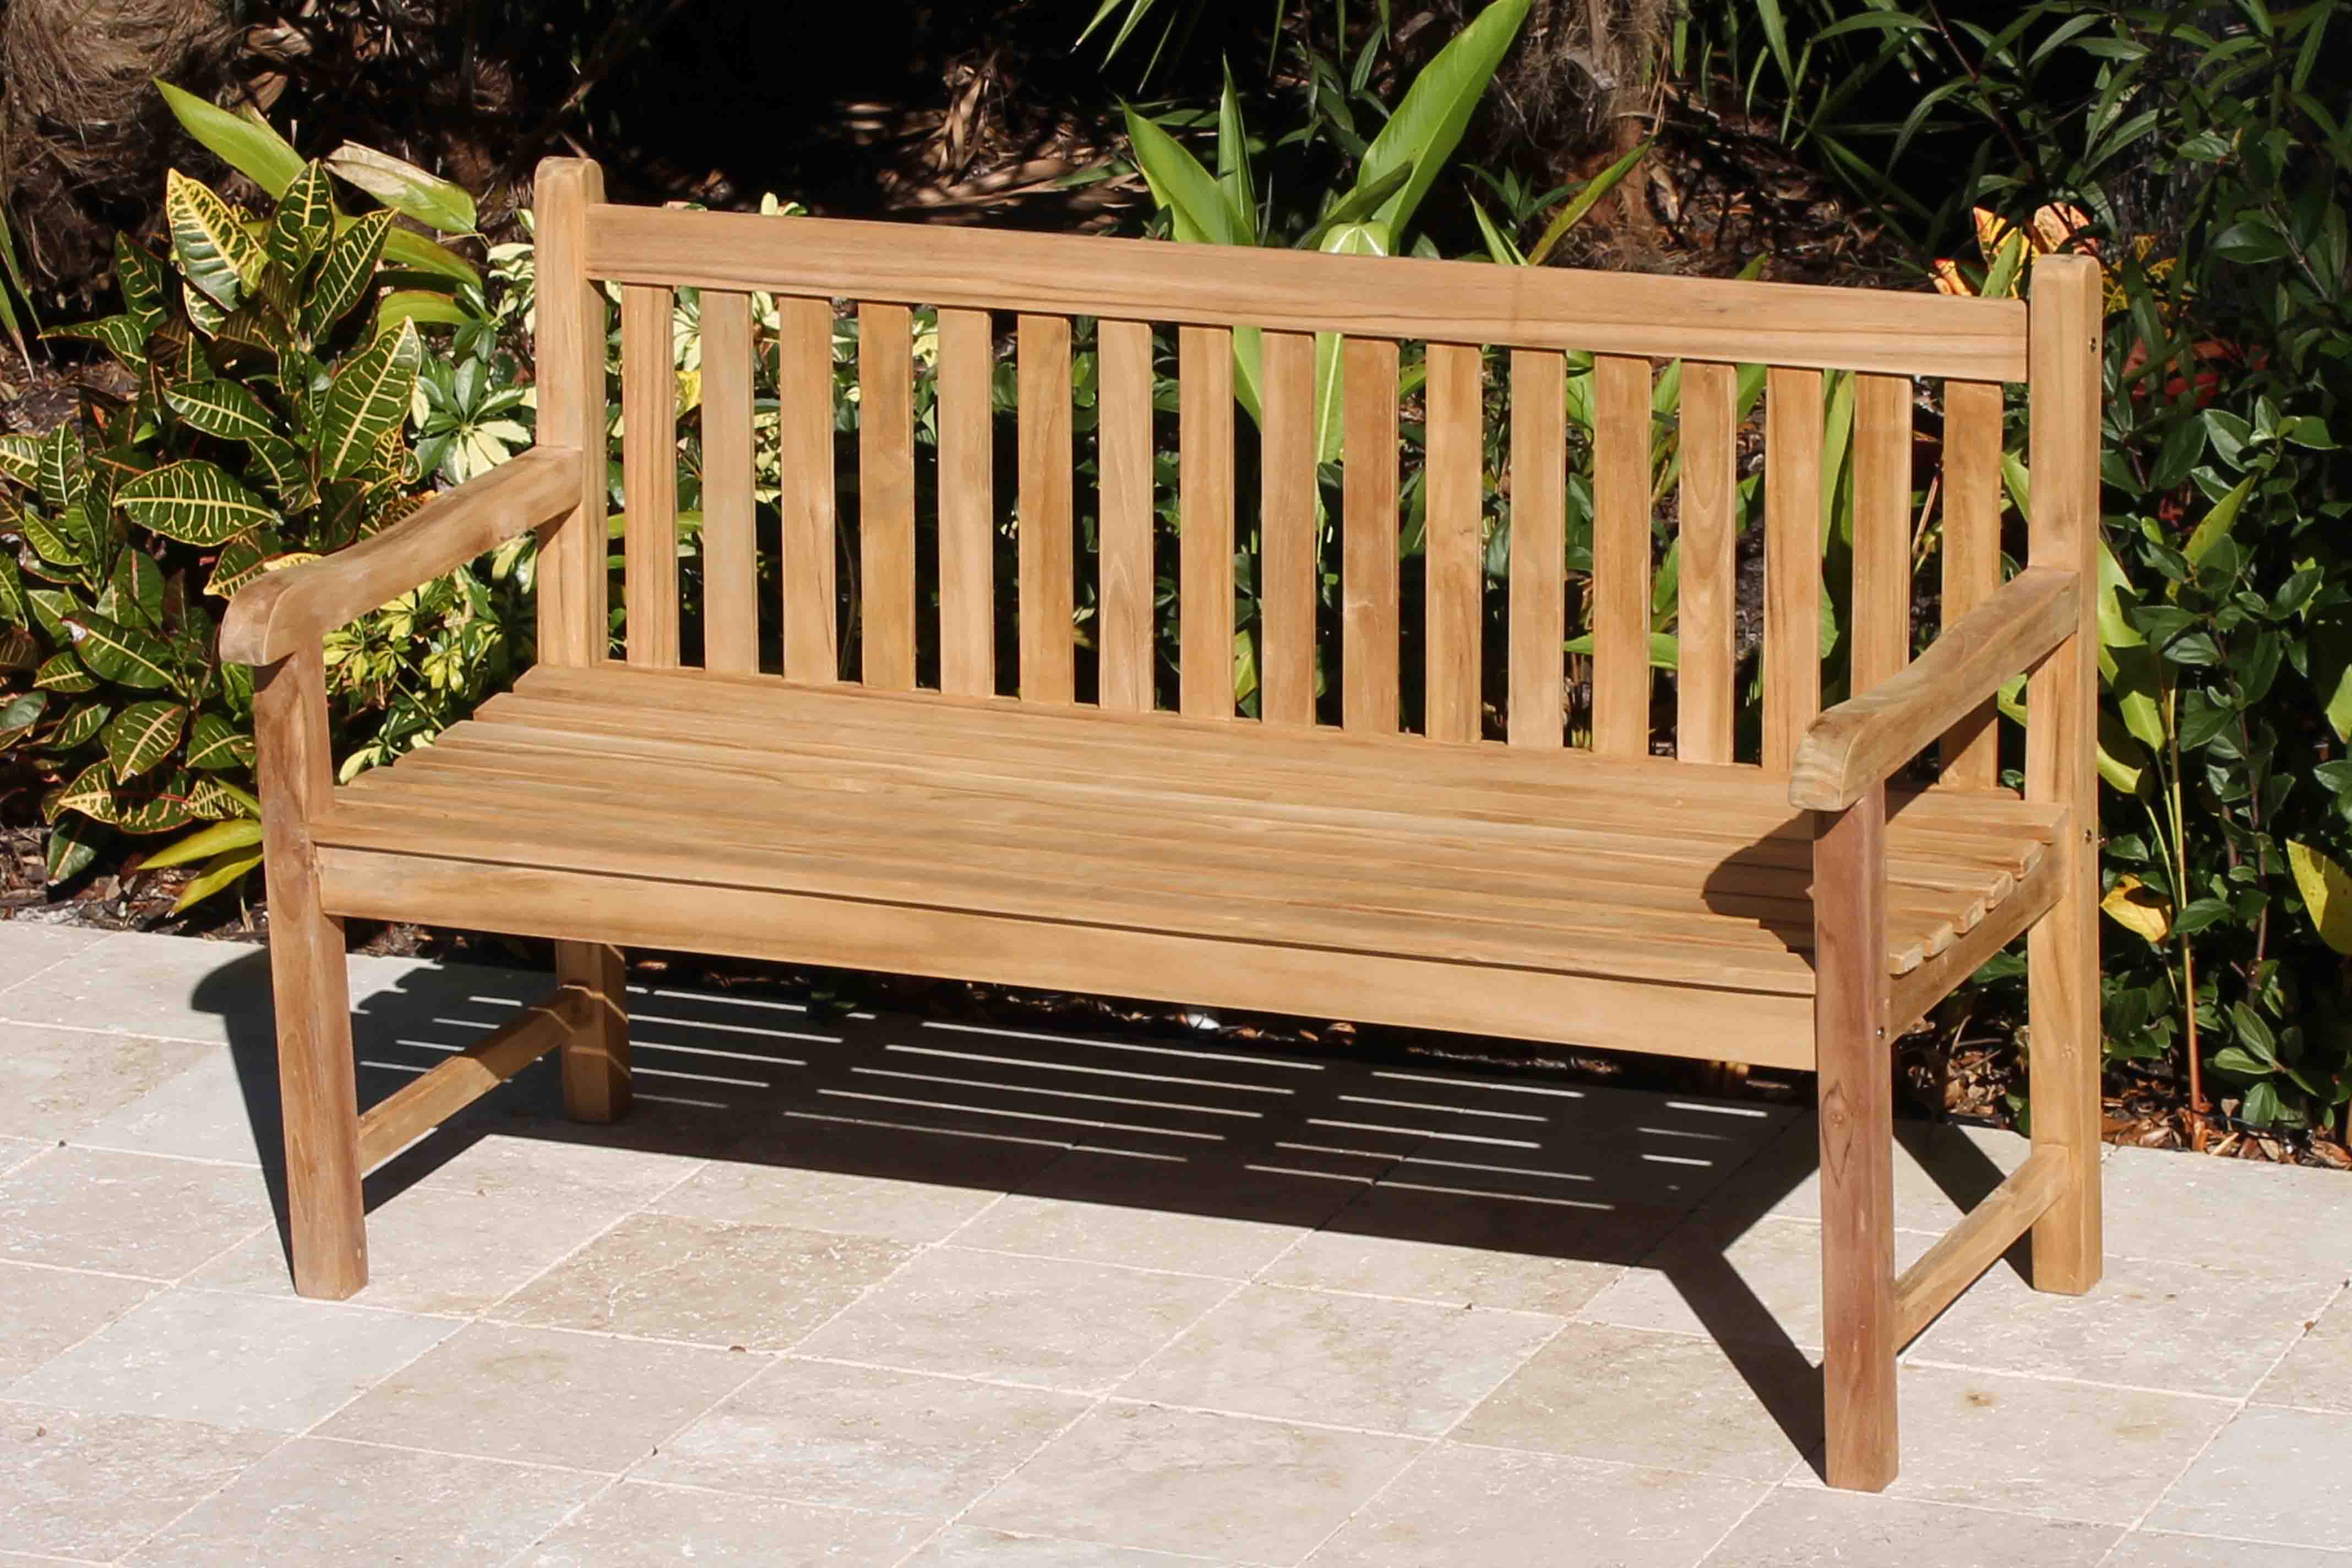 Teak Furniture For Open air Spaces